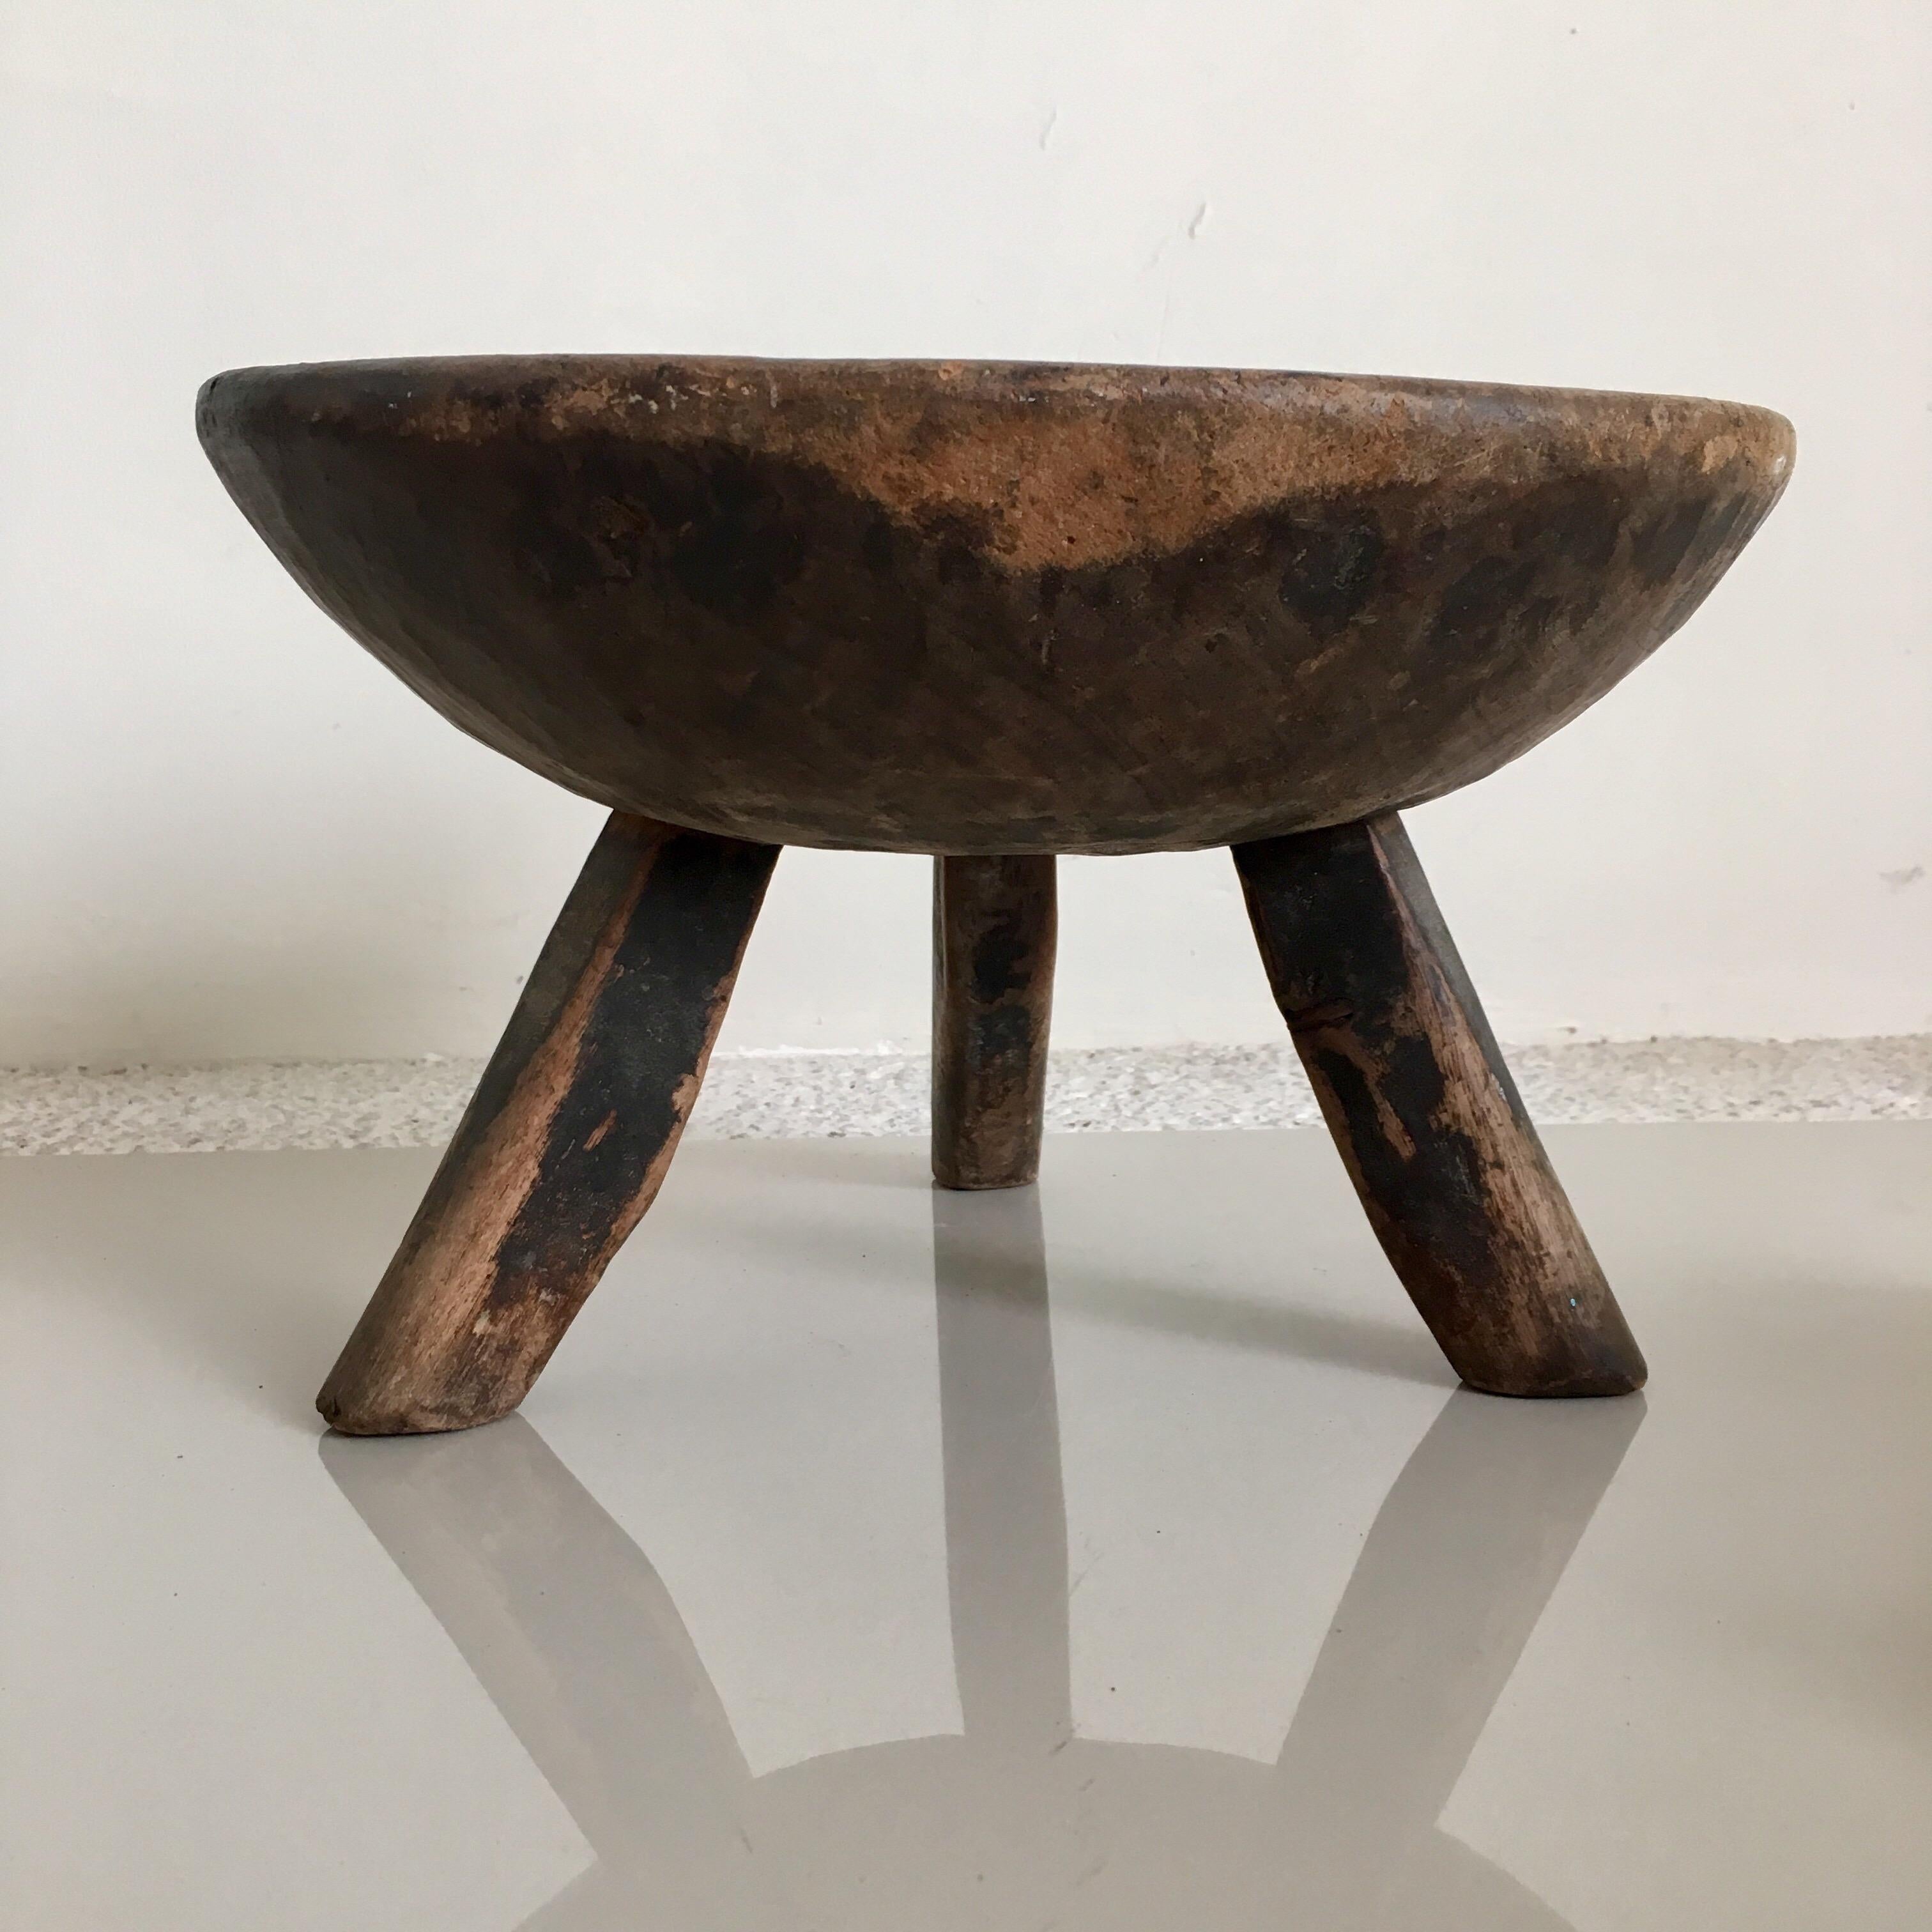 Mesquite low stool from San Luis Potosi. Beautifully carved piece from the 1980s-1990s.